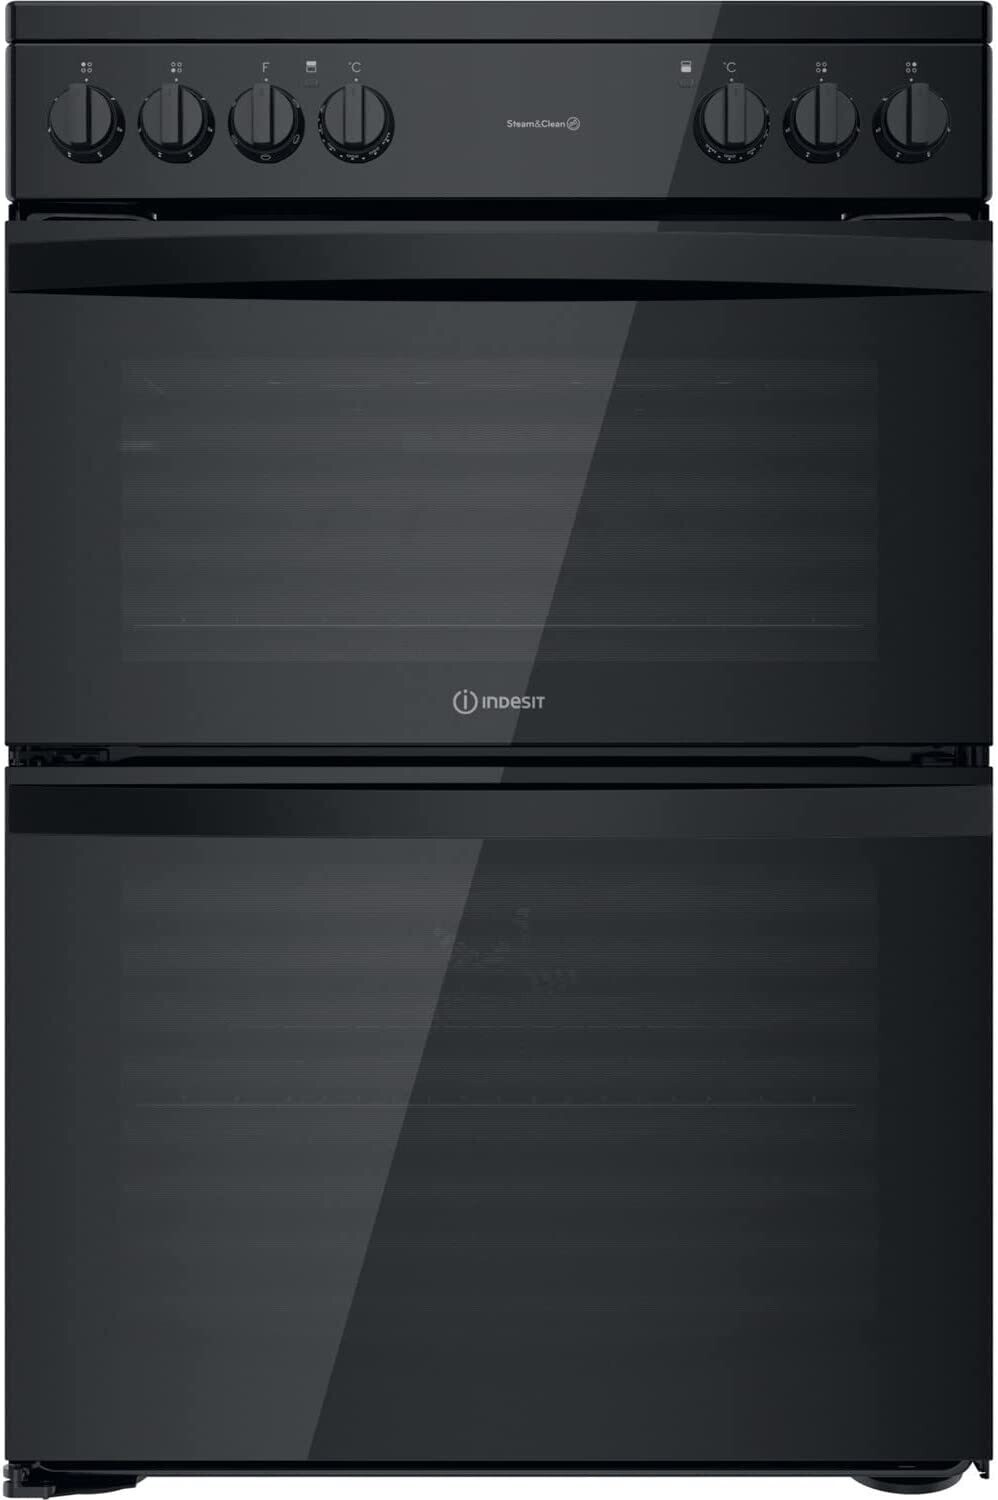 Indesit 60CM ID67V9KMB/UK Electric Double Freestanding cooker - Black - Brand New - 12 month guarantee